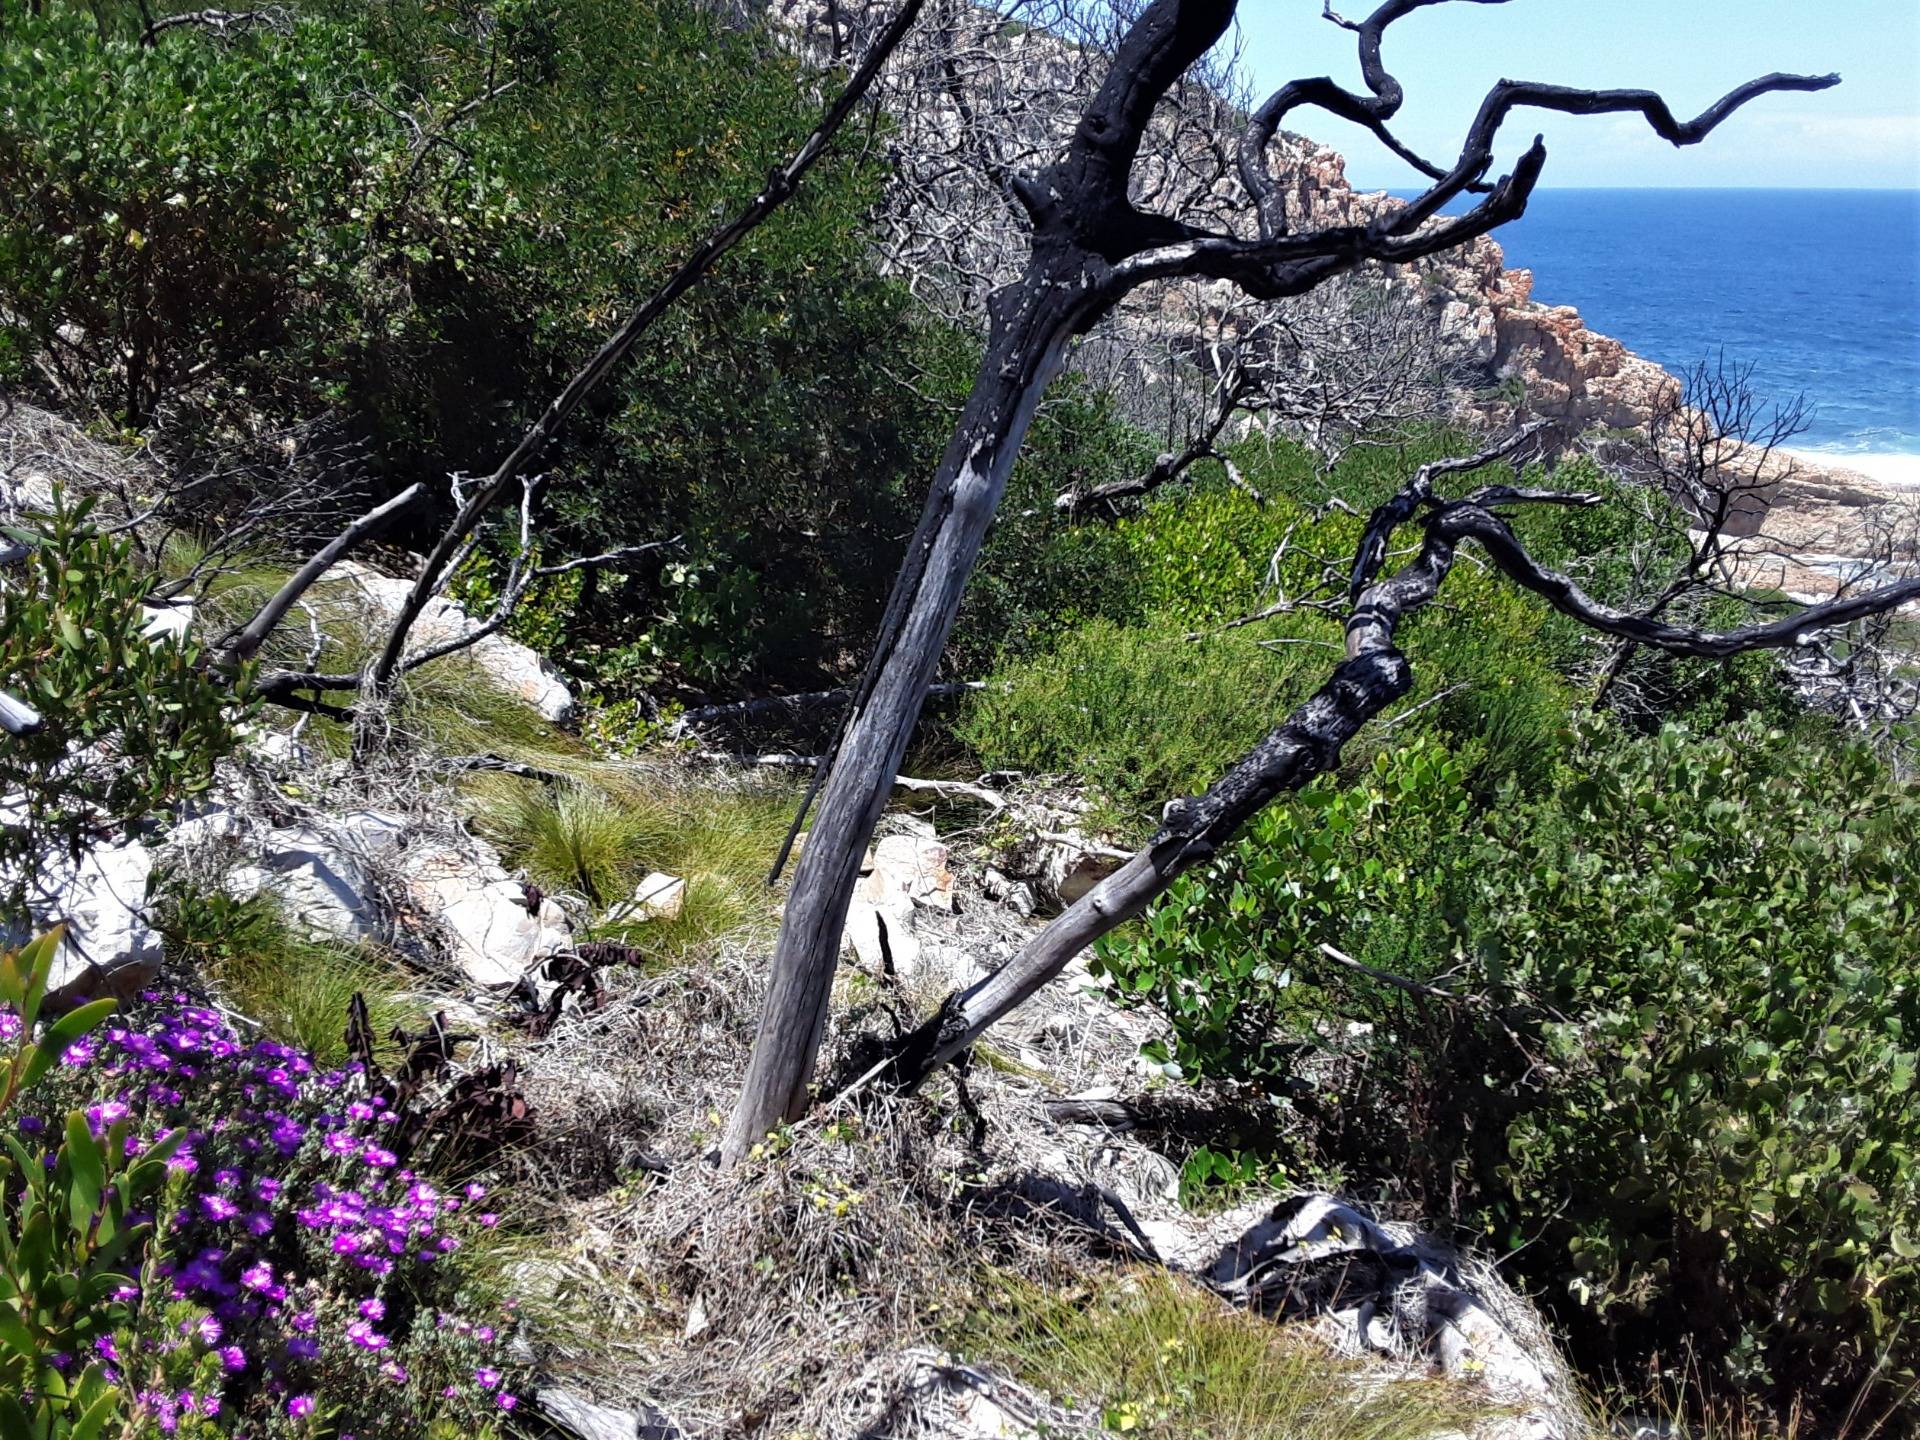 Floral rejuvenation around the remaining charred trees from the last fire five years ago